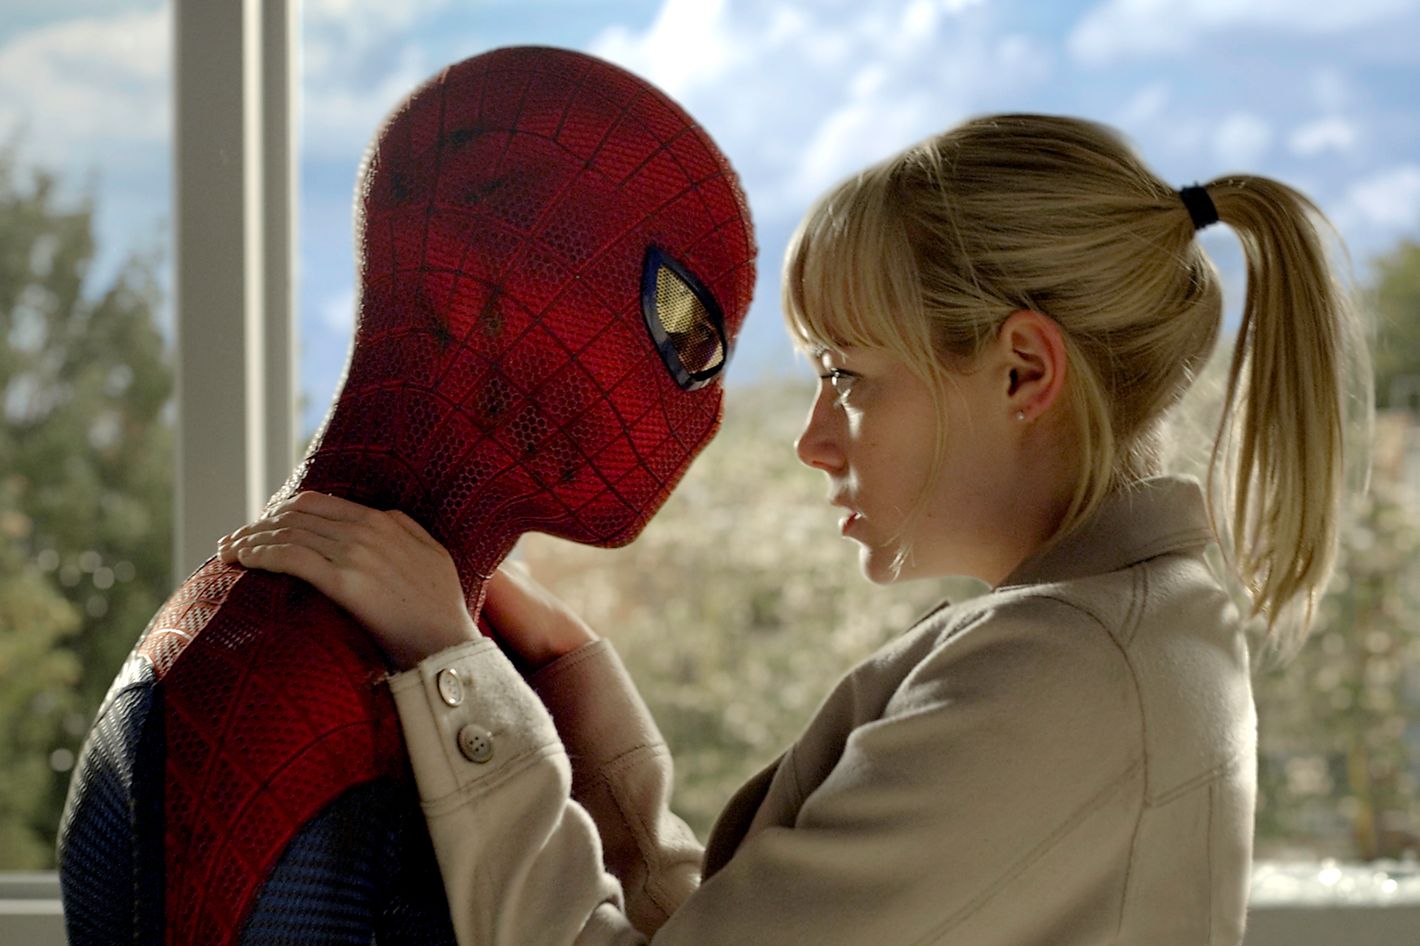 The Amazing Spider-Man: An Unnecessary Reboot Makes a Convincing